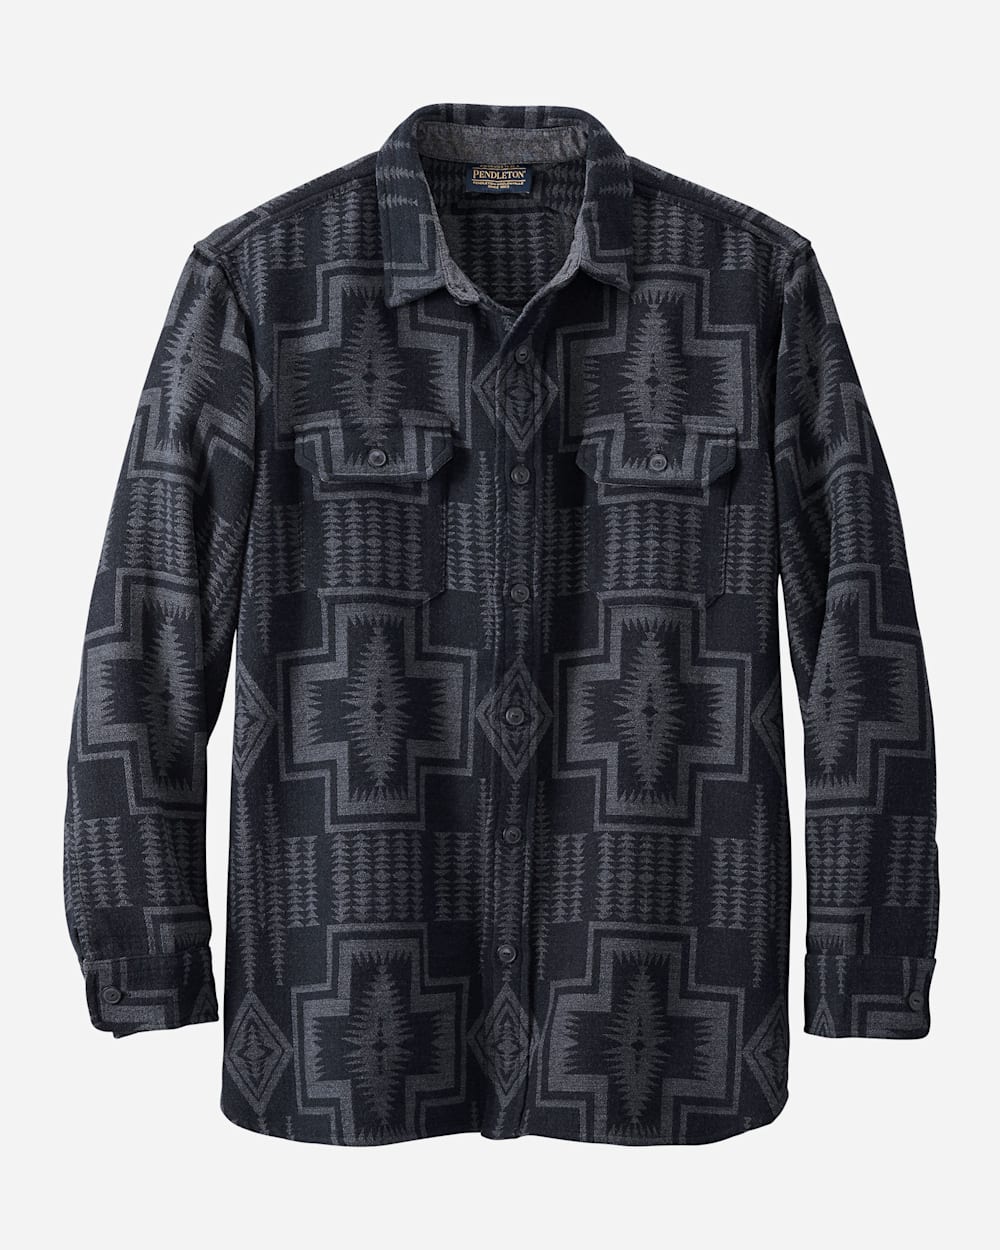 ALTERNATE VIEW OF MEN'S DOUBLESOFT FLANNEL BEACH SHIRT IN BLACK/GREY HARDING image number 6